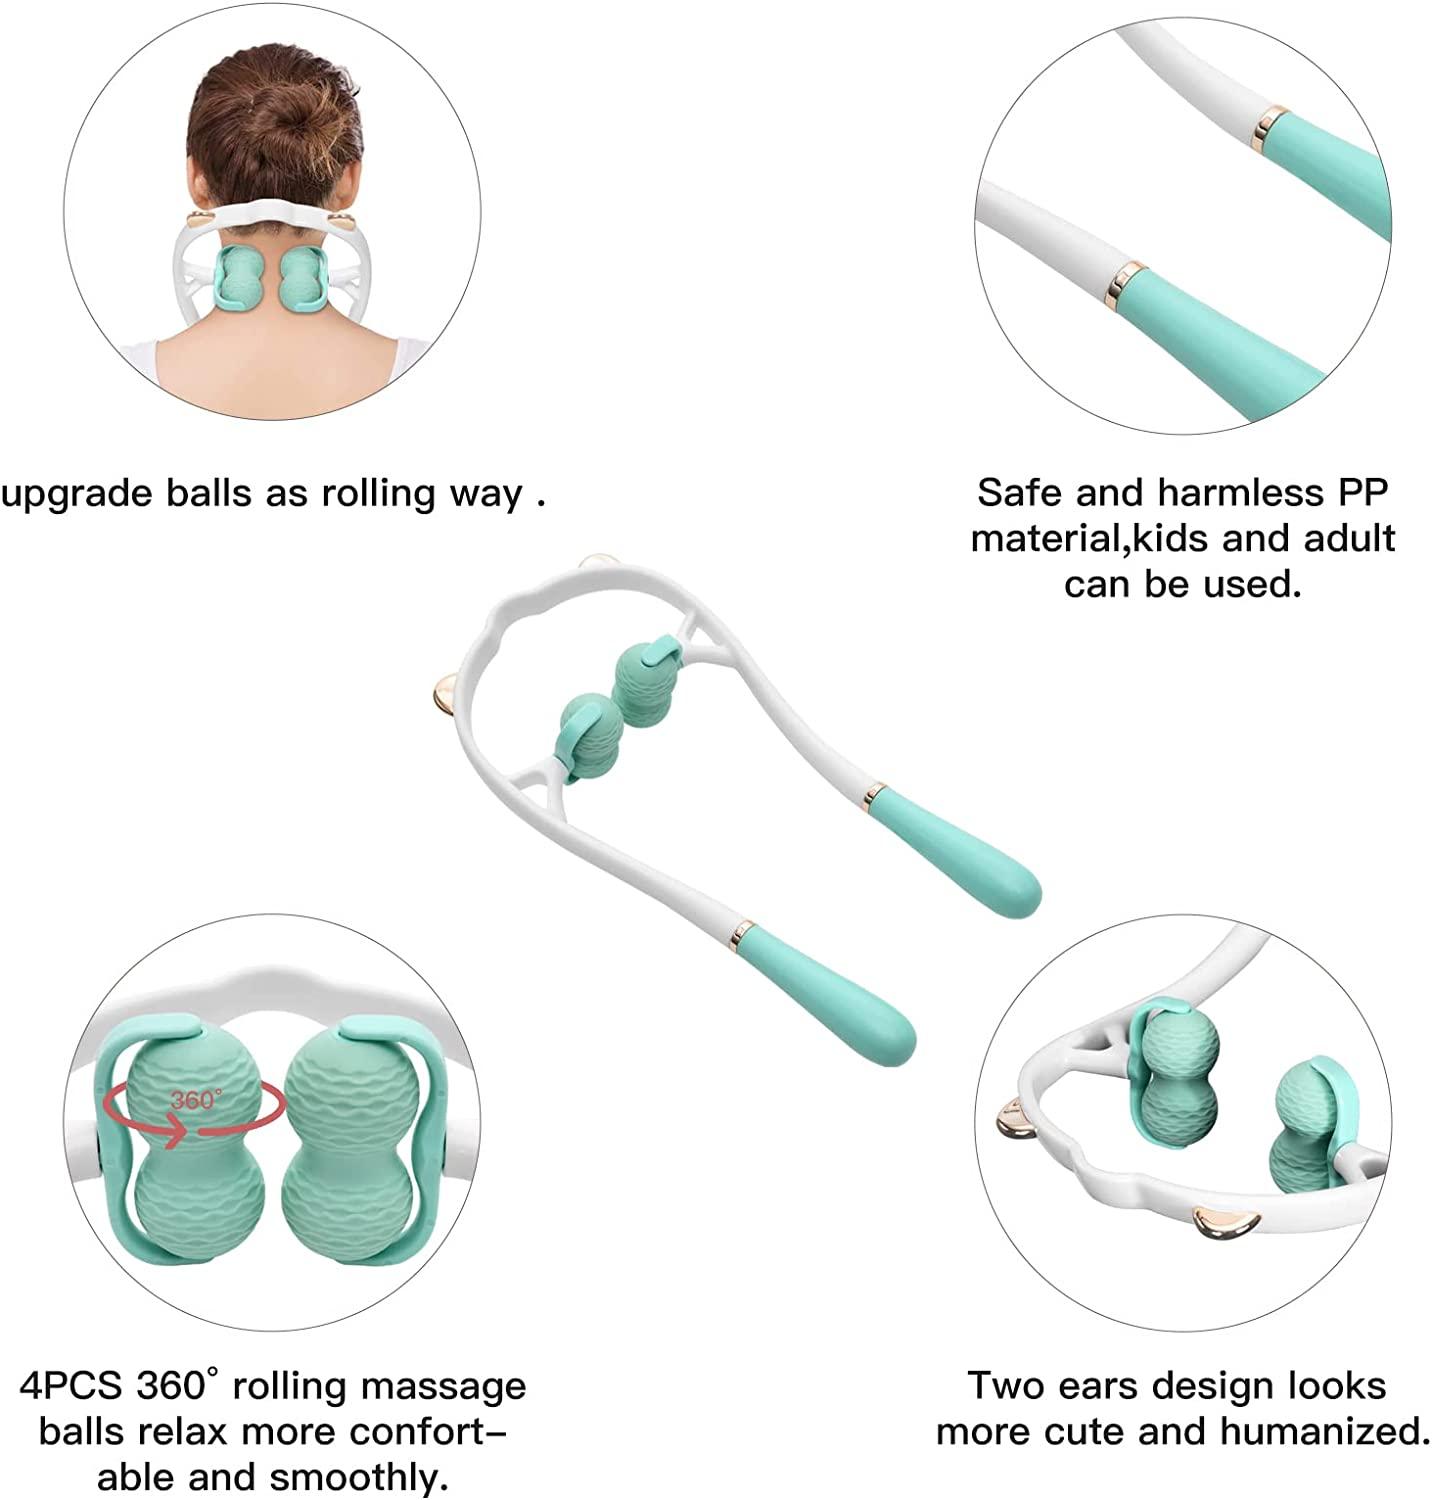 Neck Massager Therapy Neck and Shoulder Dual Trigger Point Roller